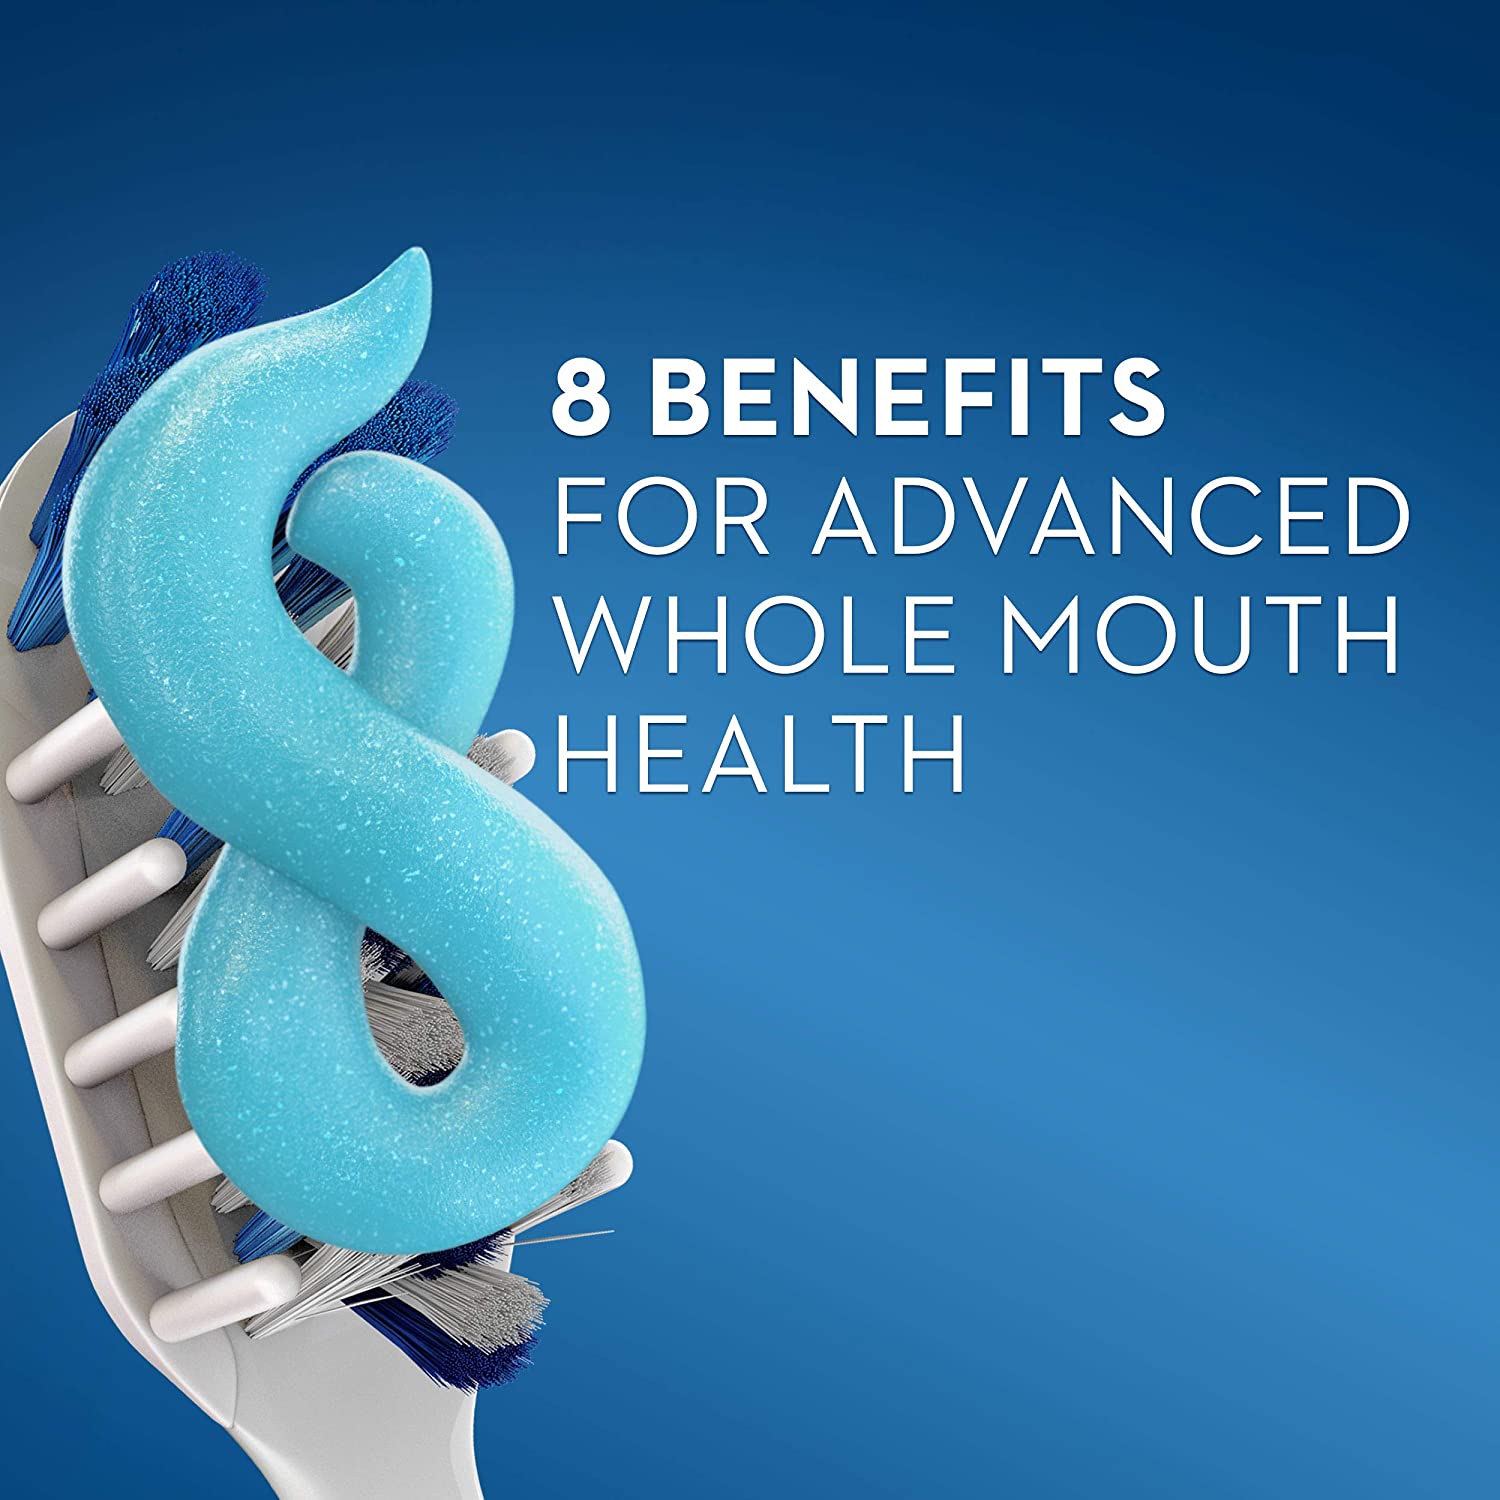 Crest Pro Health Smooth Formula Toothpaste, Clean Mint, 4.6 oz, 3 Pk - image 4 of 7